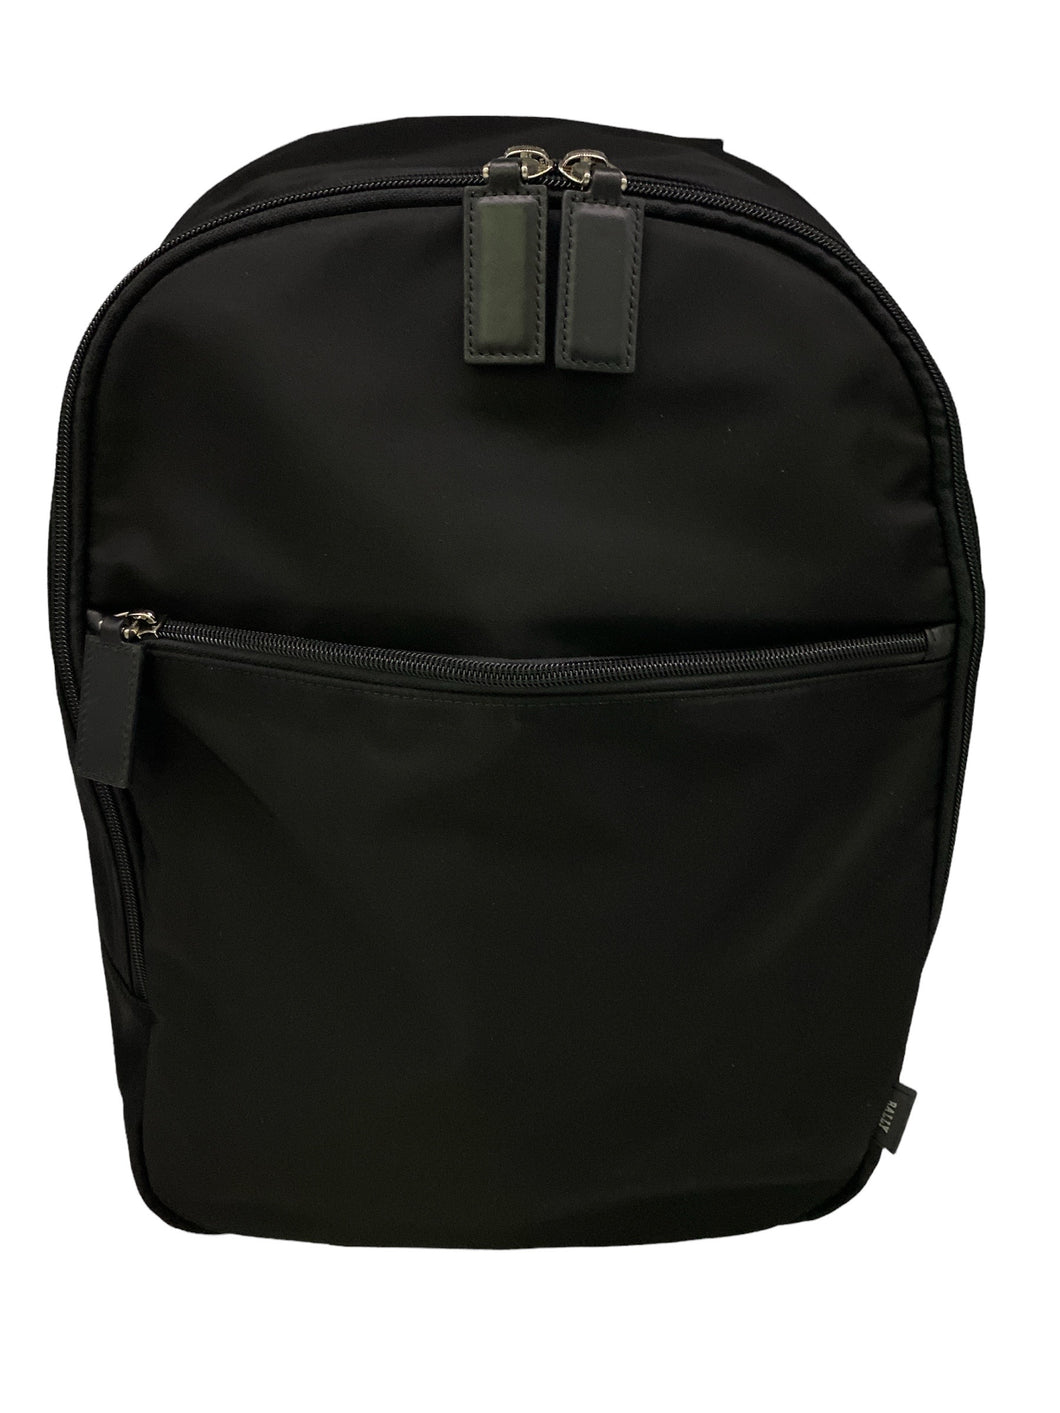 NEW Bally Taff Men's 6216425 Black Fabric & Leather Backpack MSRP $499